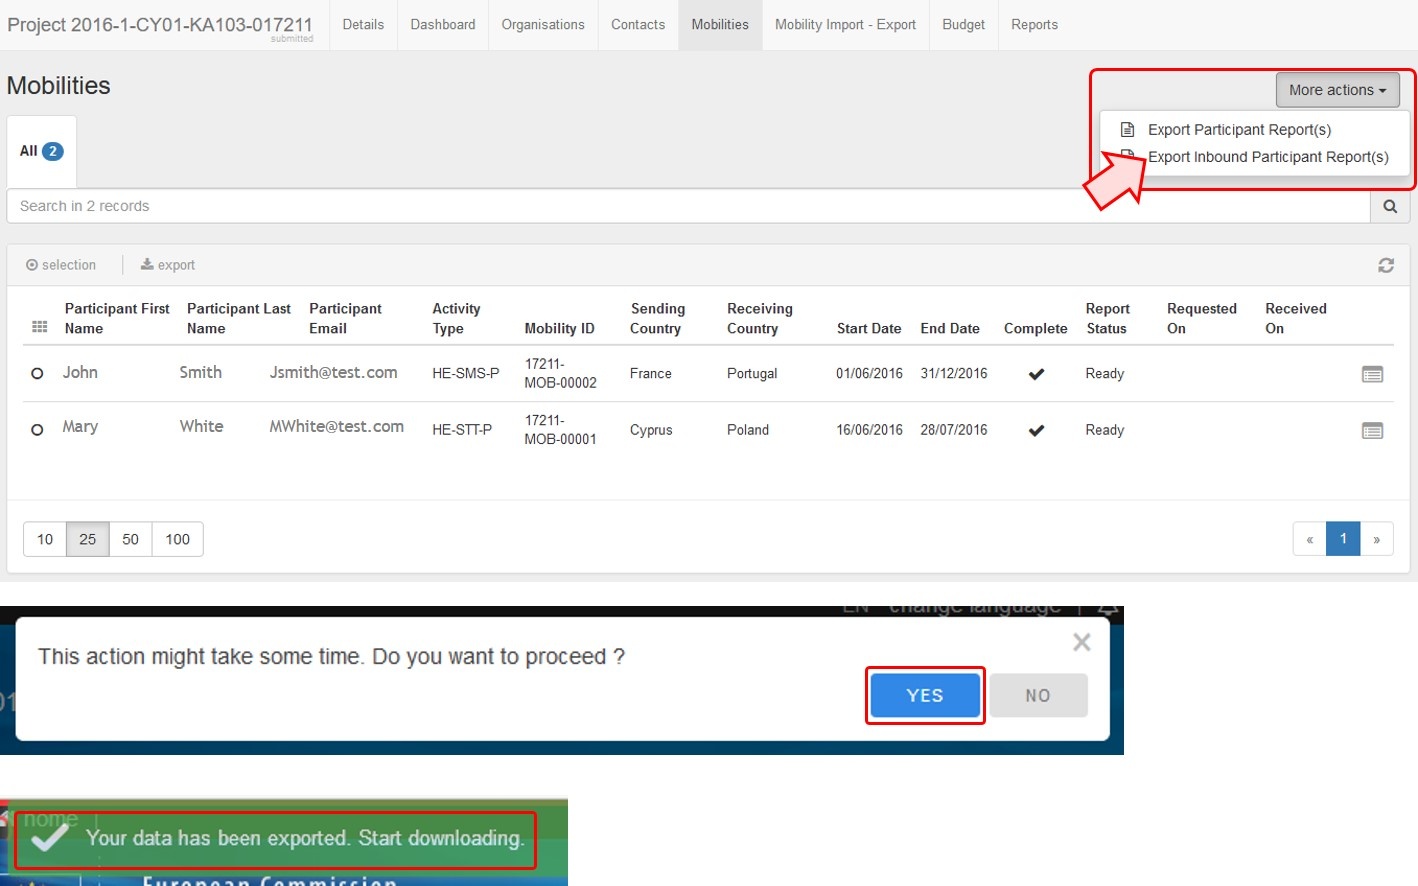  Click the More Actions button and select Export Inbound Participant Report(s)